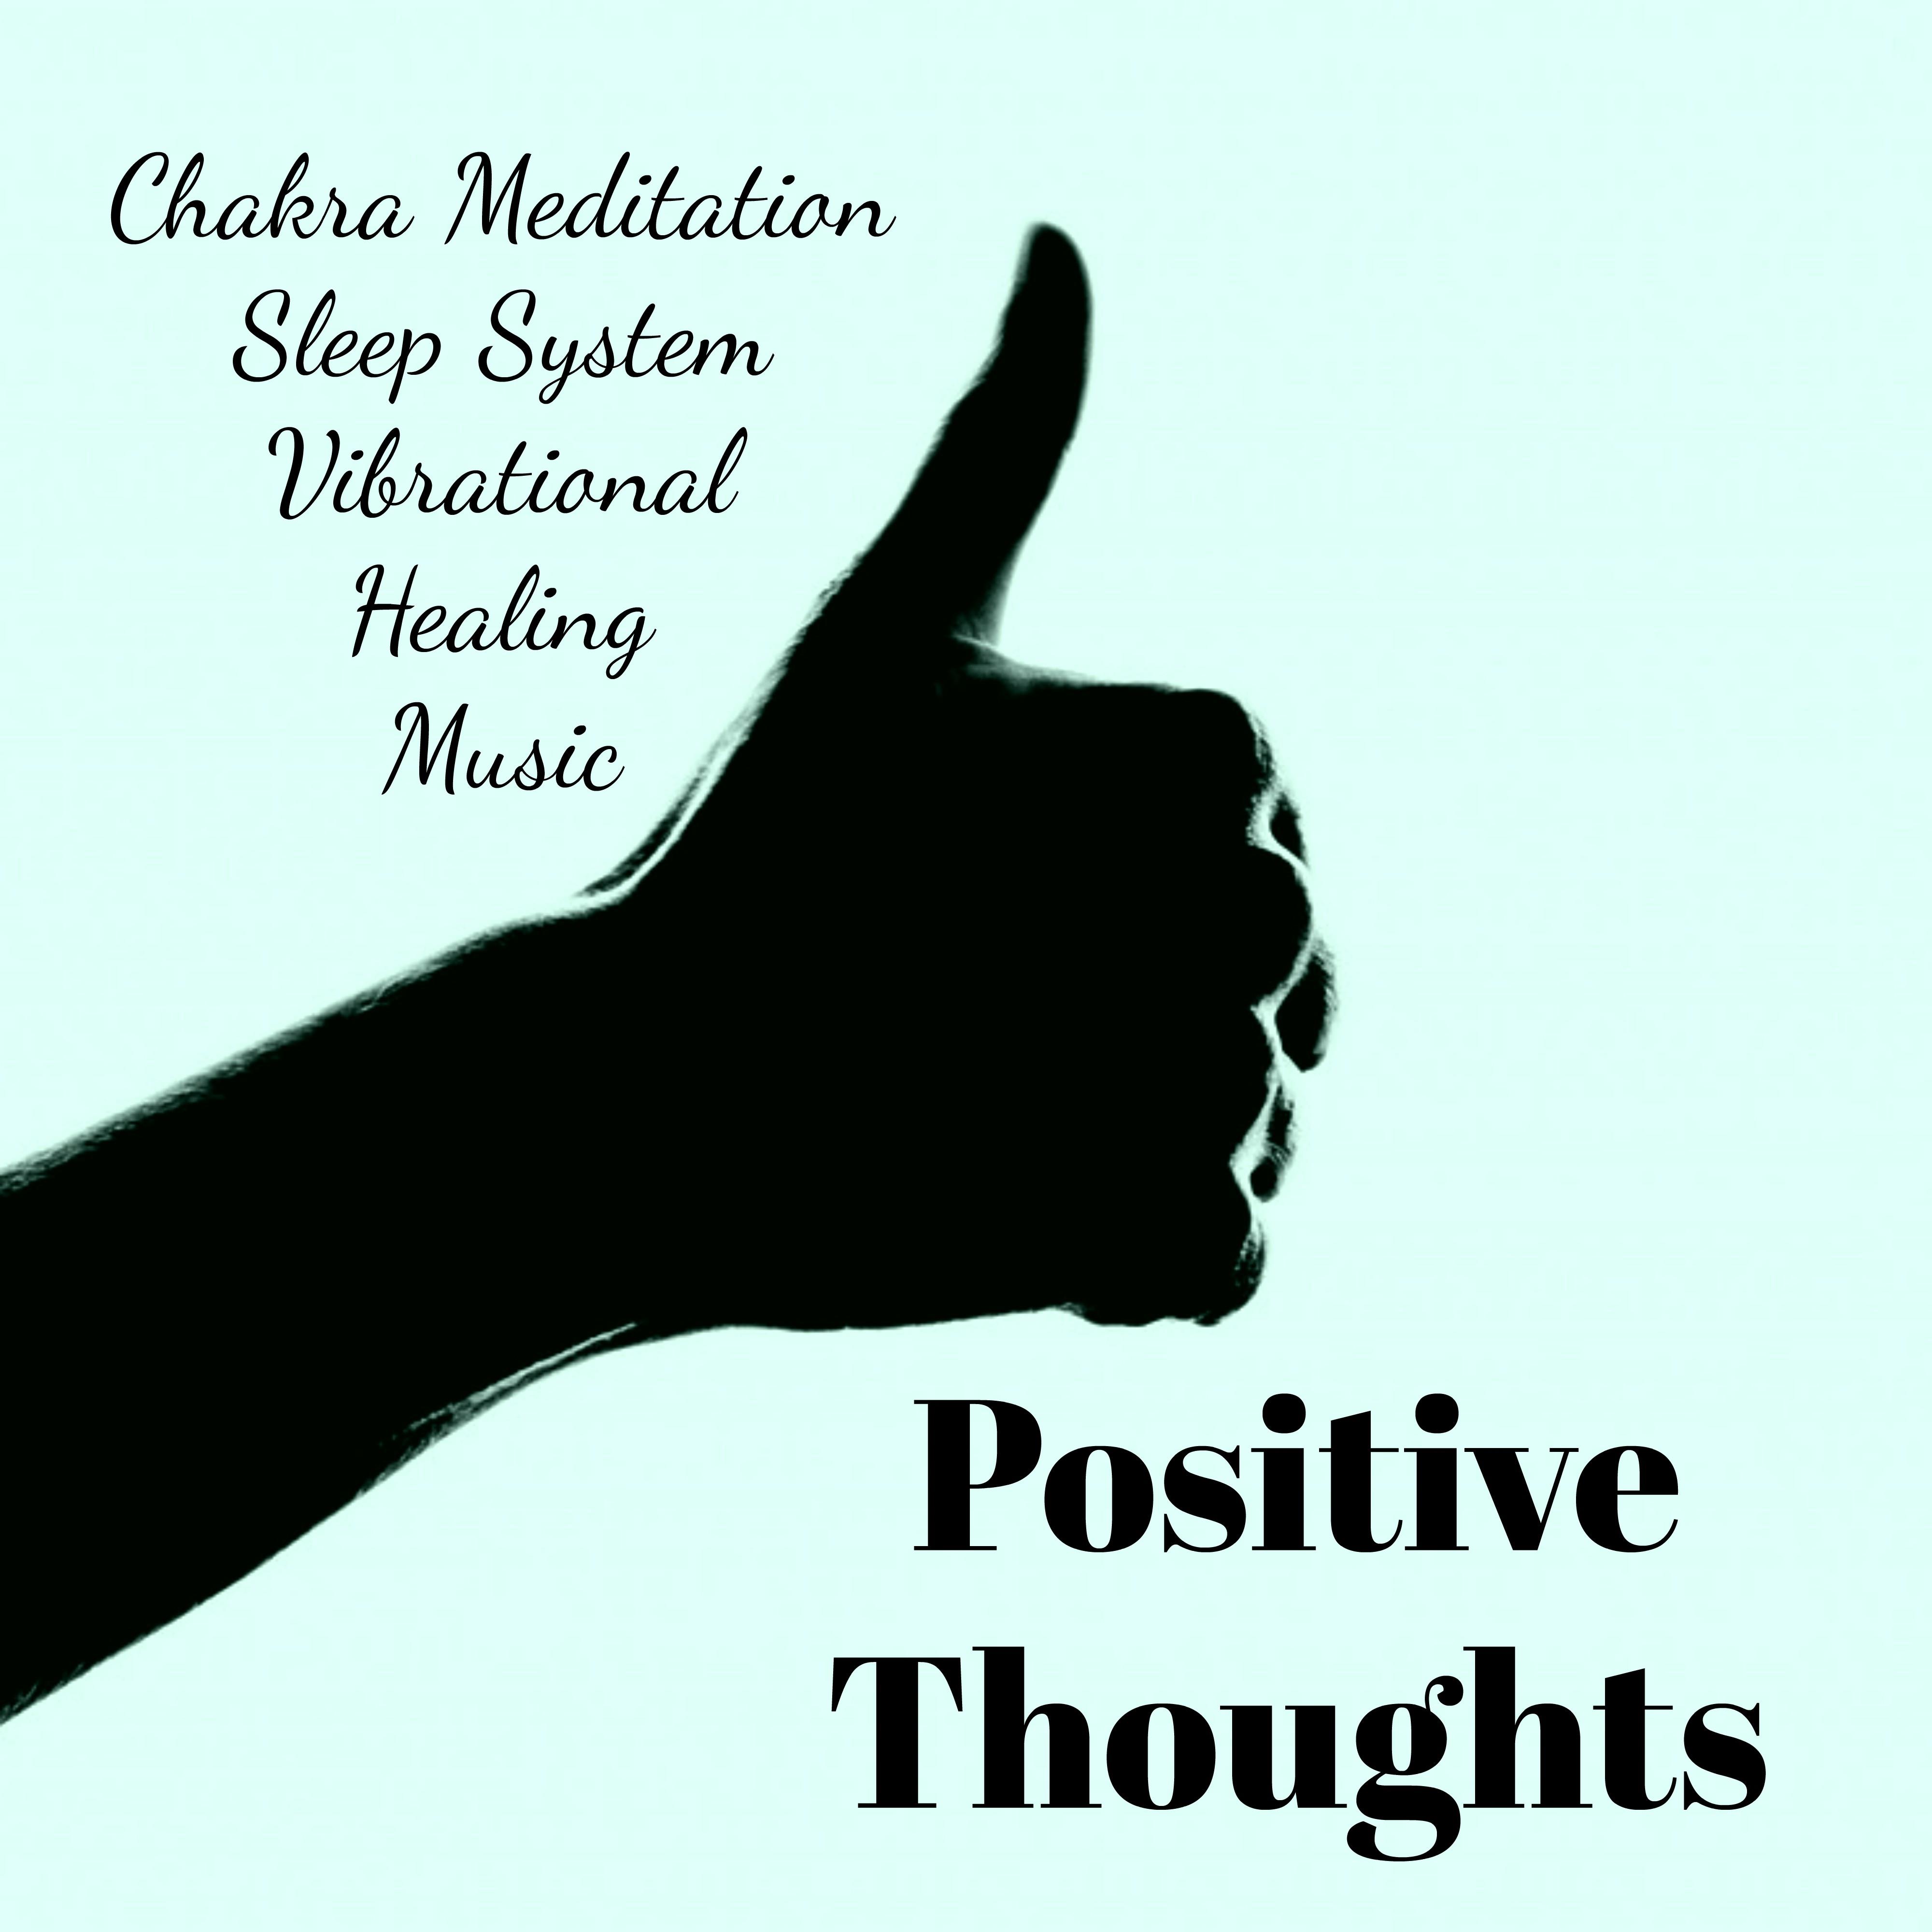 Positive Thoughts - Chakra Meditation Sleep System Vibrational Healing Music with Natural Binaural New Age Sounds